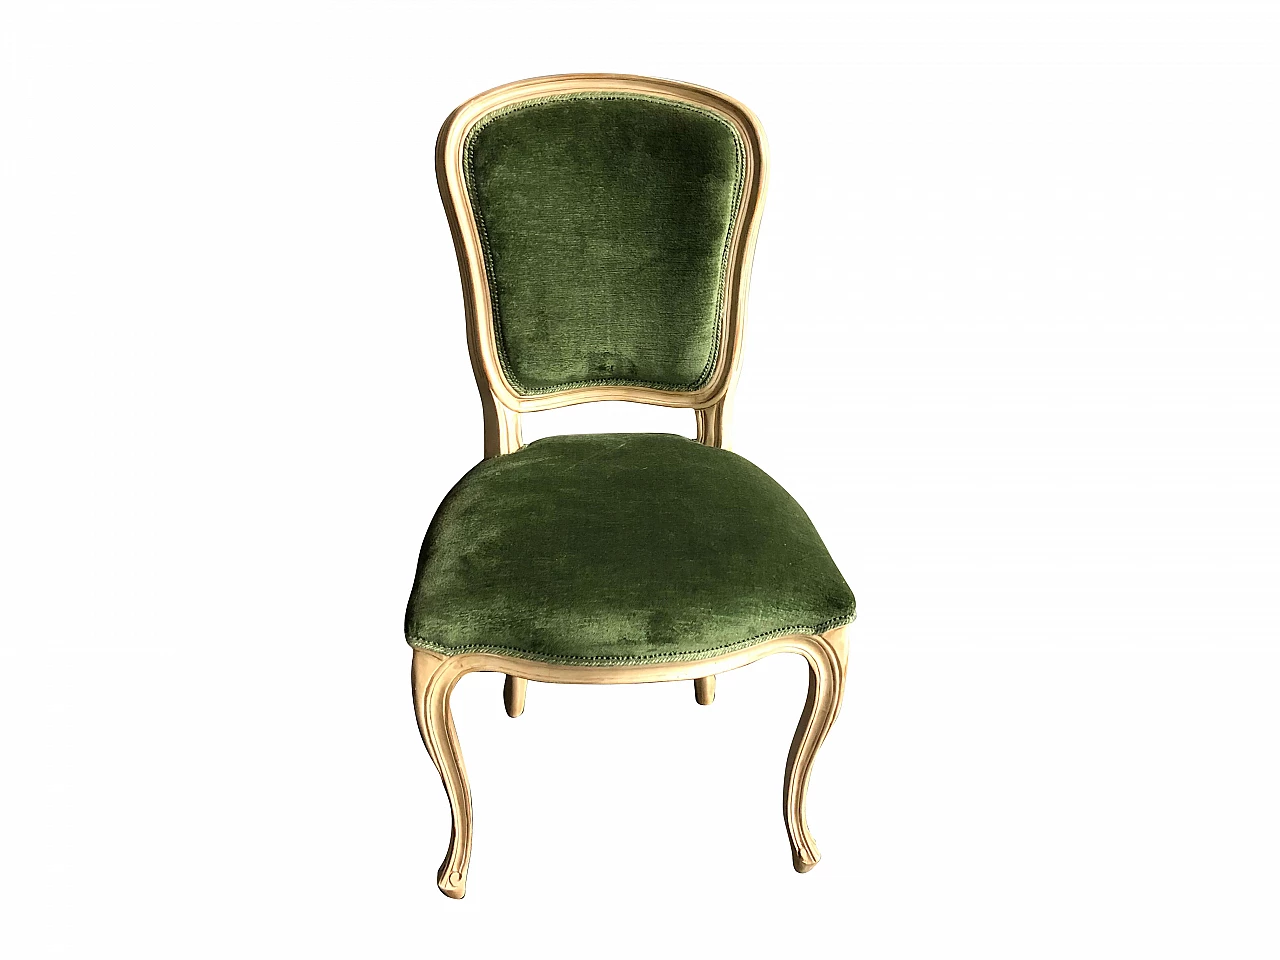 Wooden and green velvet chair in Neoclassical style by Flamant, early 2000s 1290100